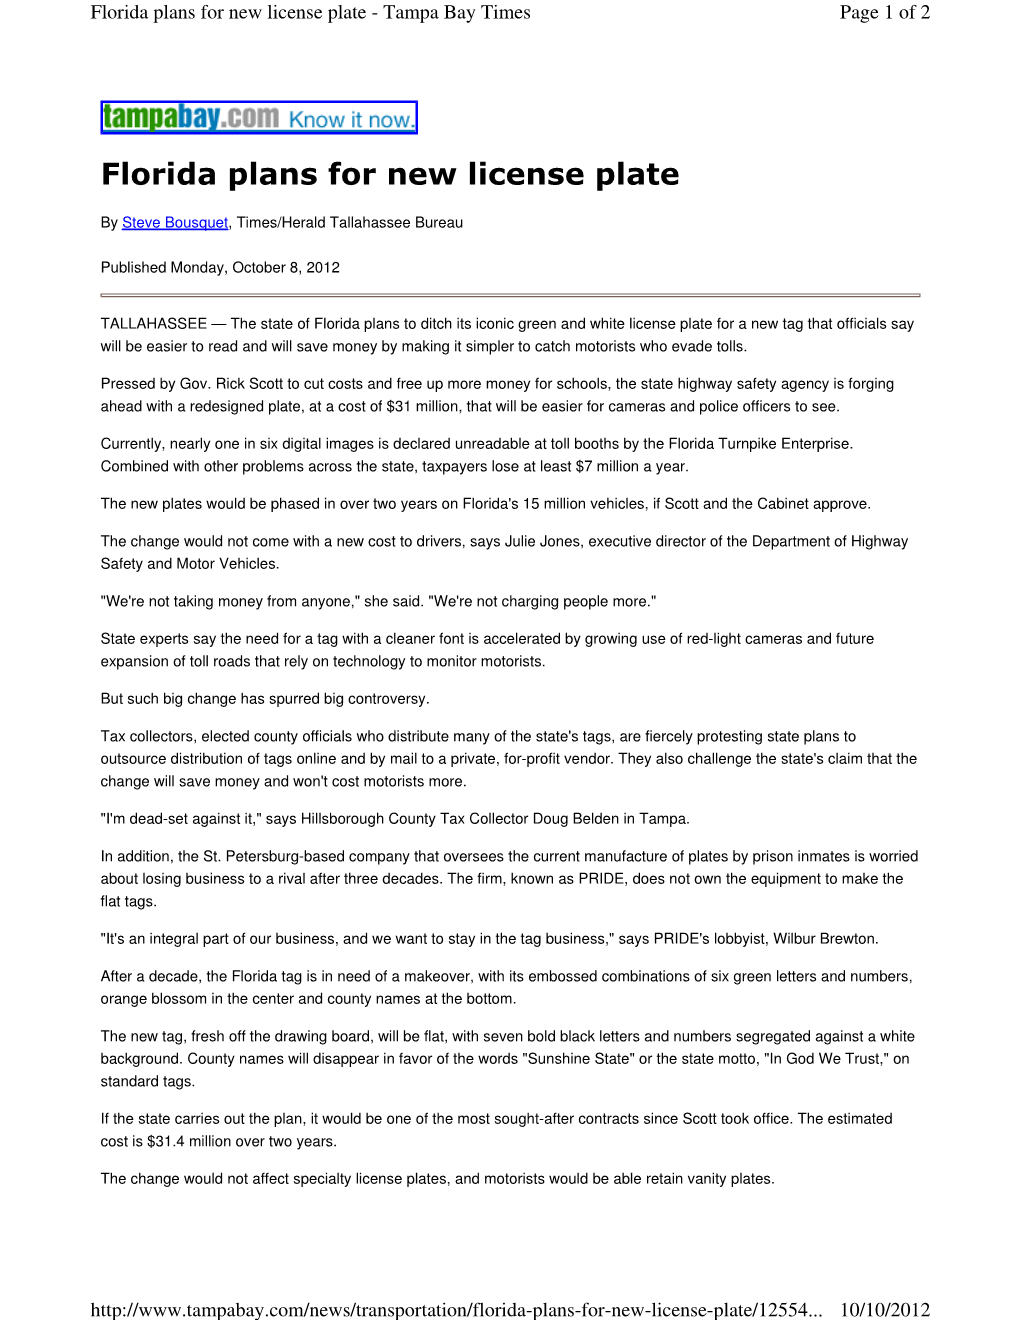 Florida Plans for New License Plate - Tampa Bay Times Page 1 of 2